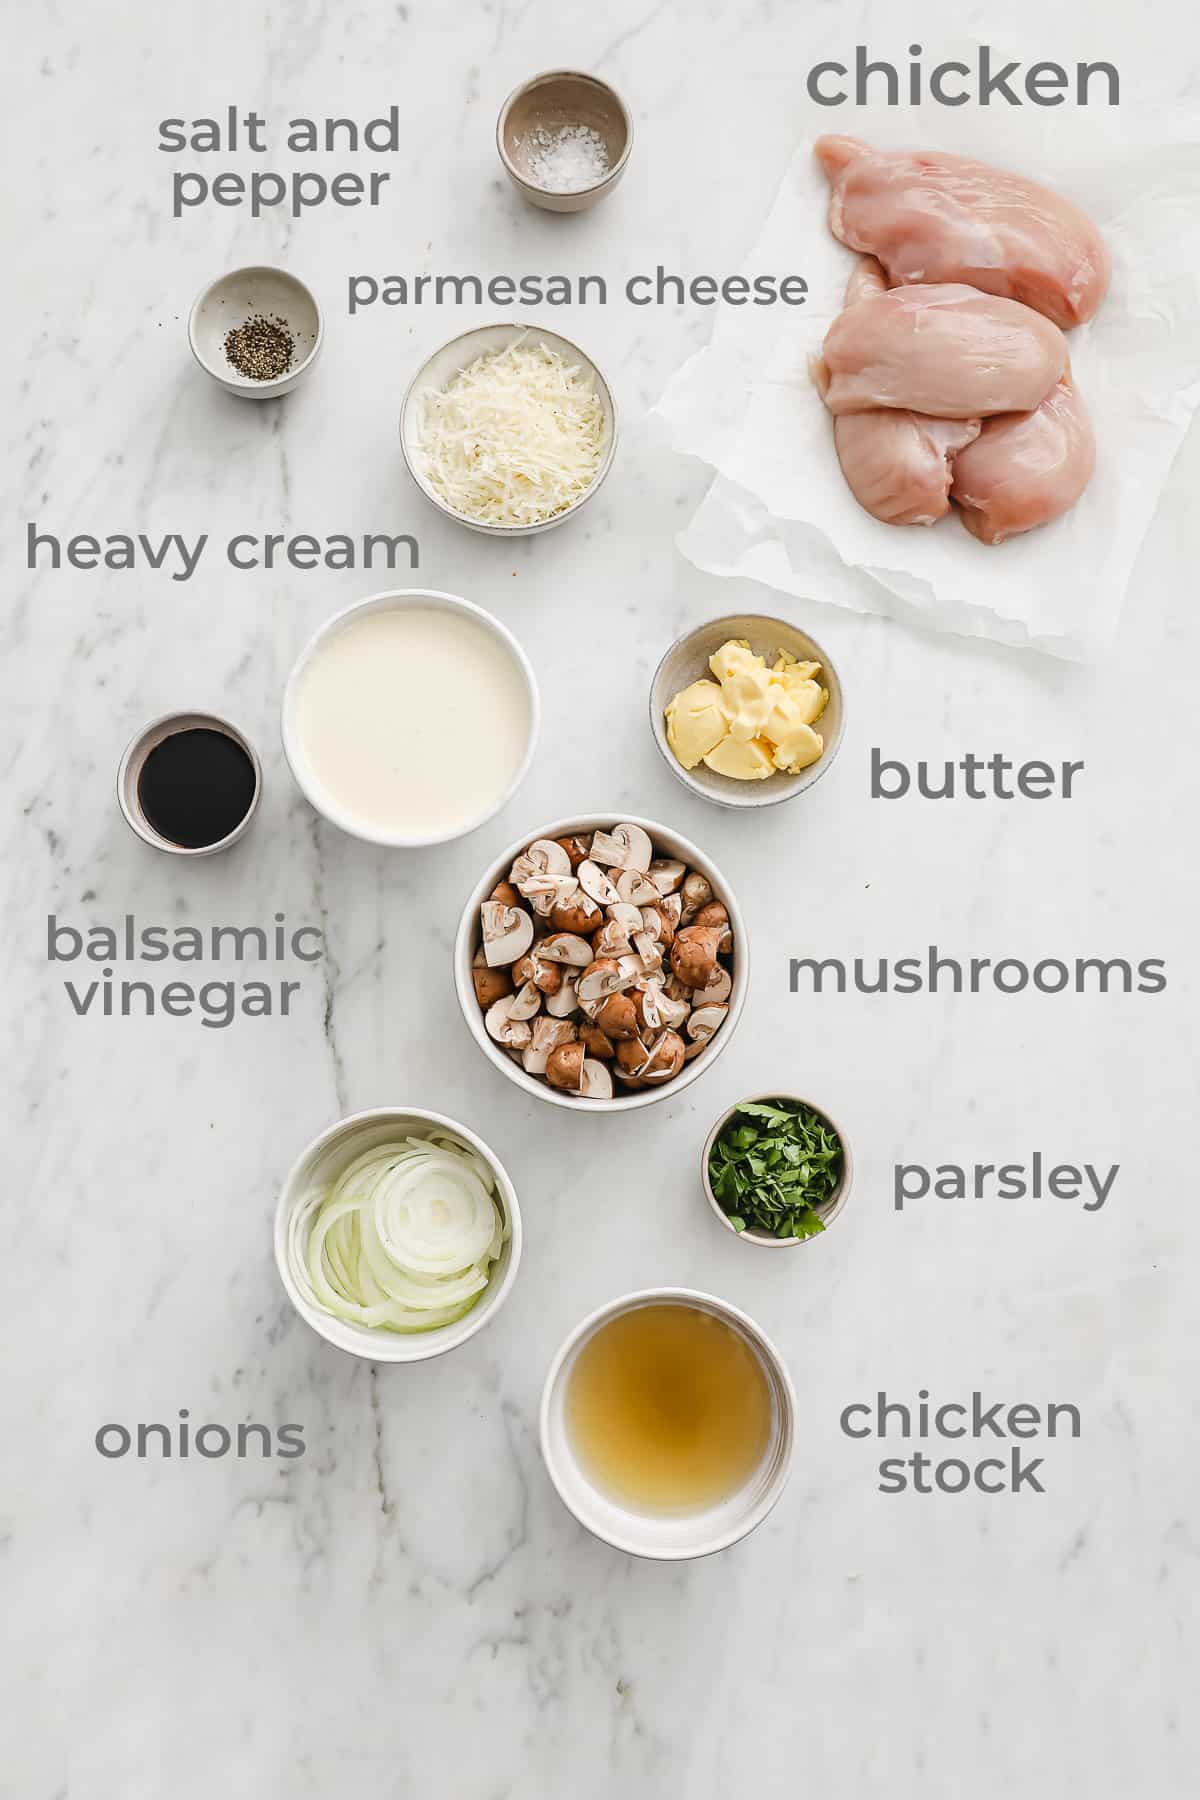 ingredients laid out to make a low carb chicken dish - chicken, onion, mushroom, cheese, cream, vinegar, salt, and pepper